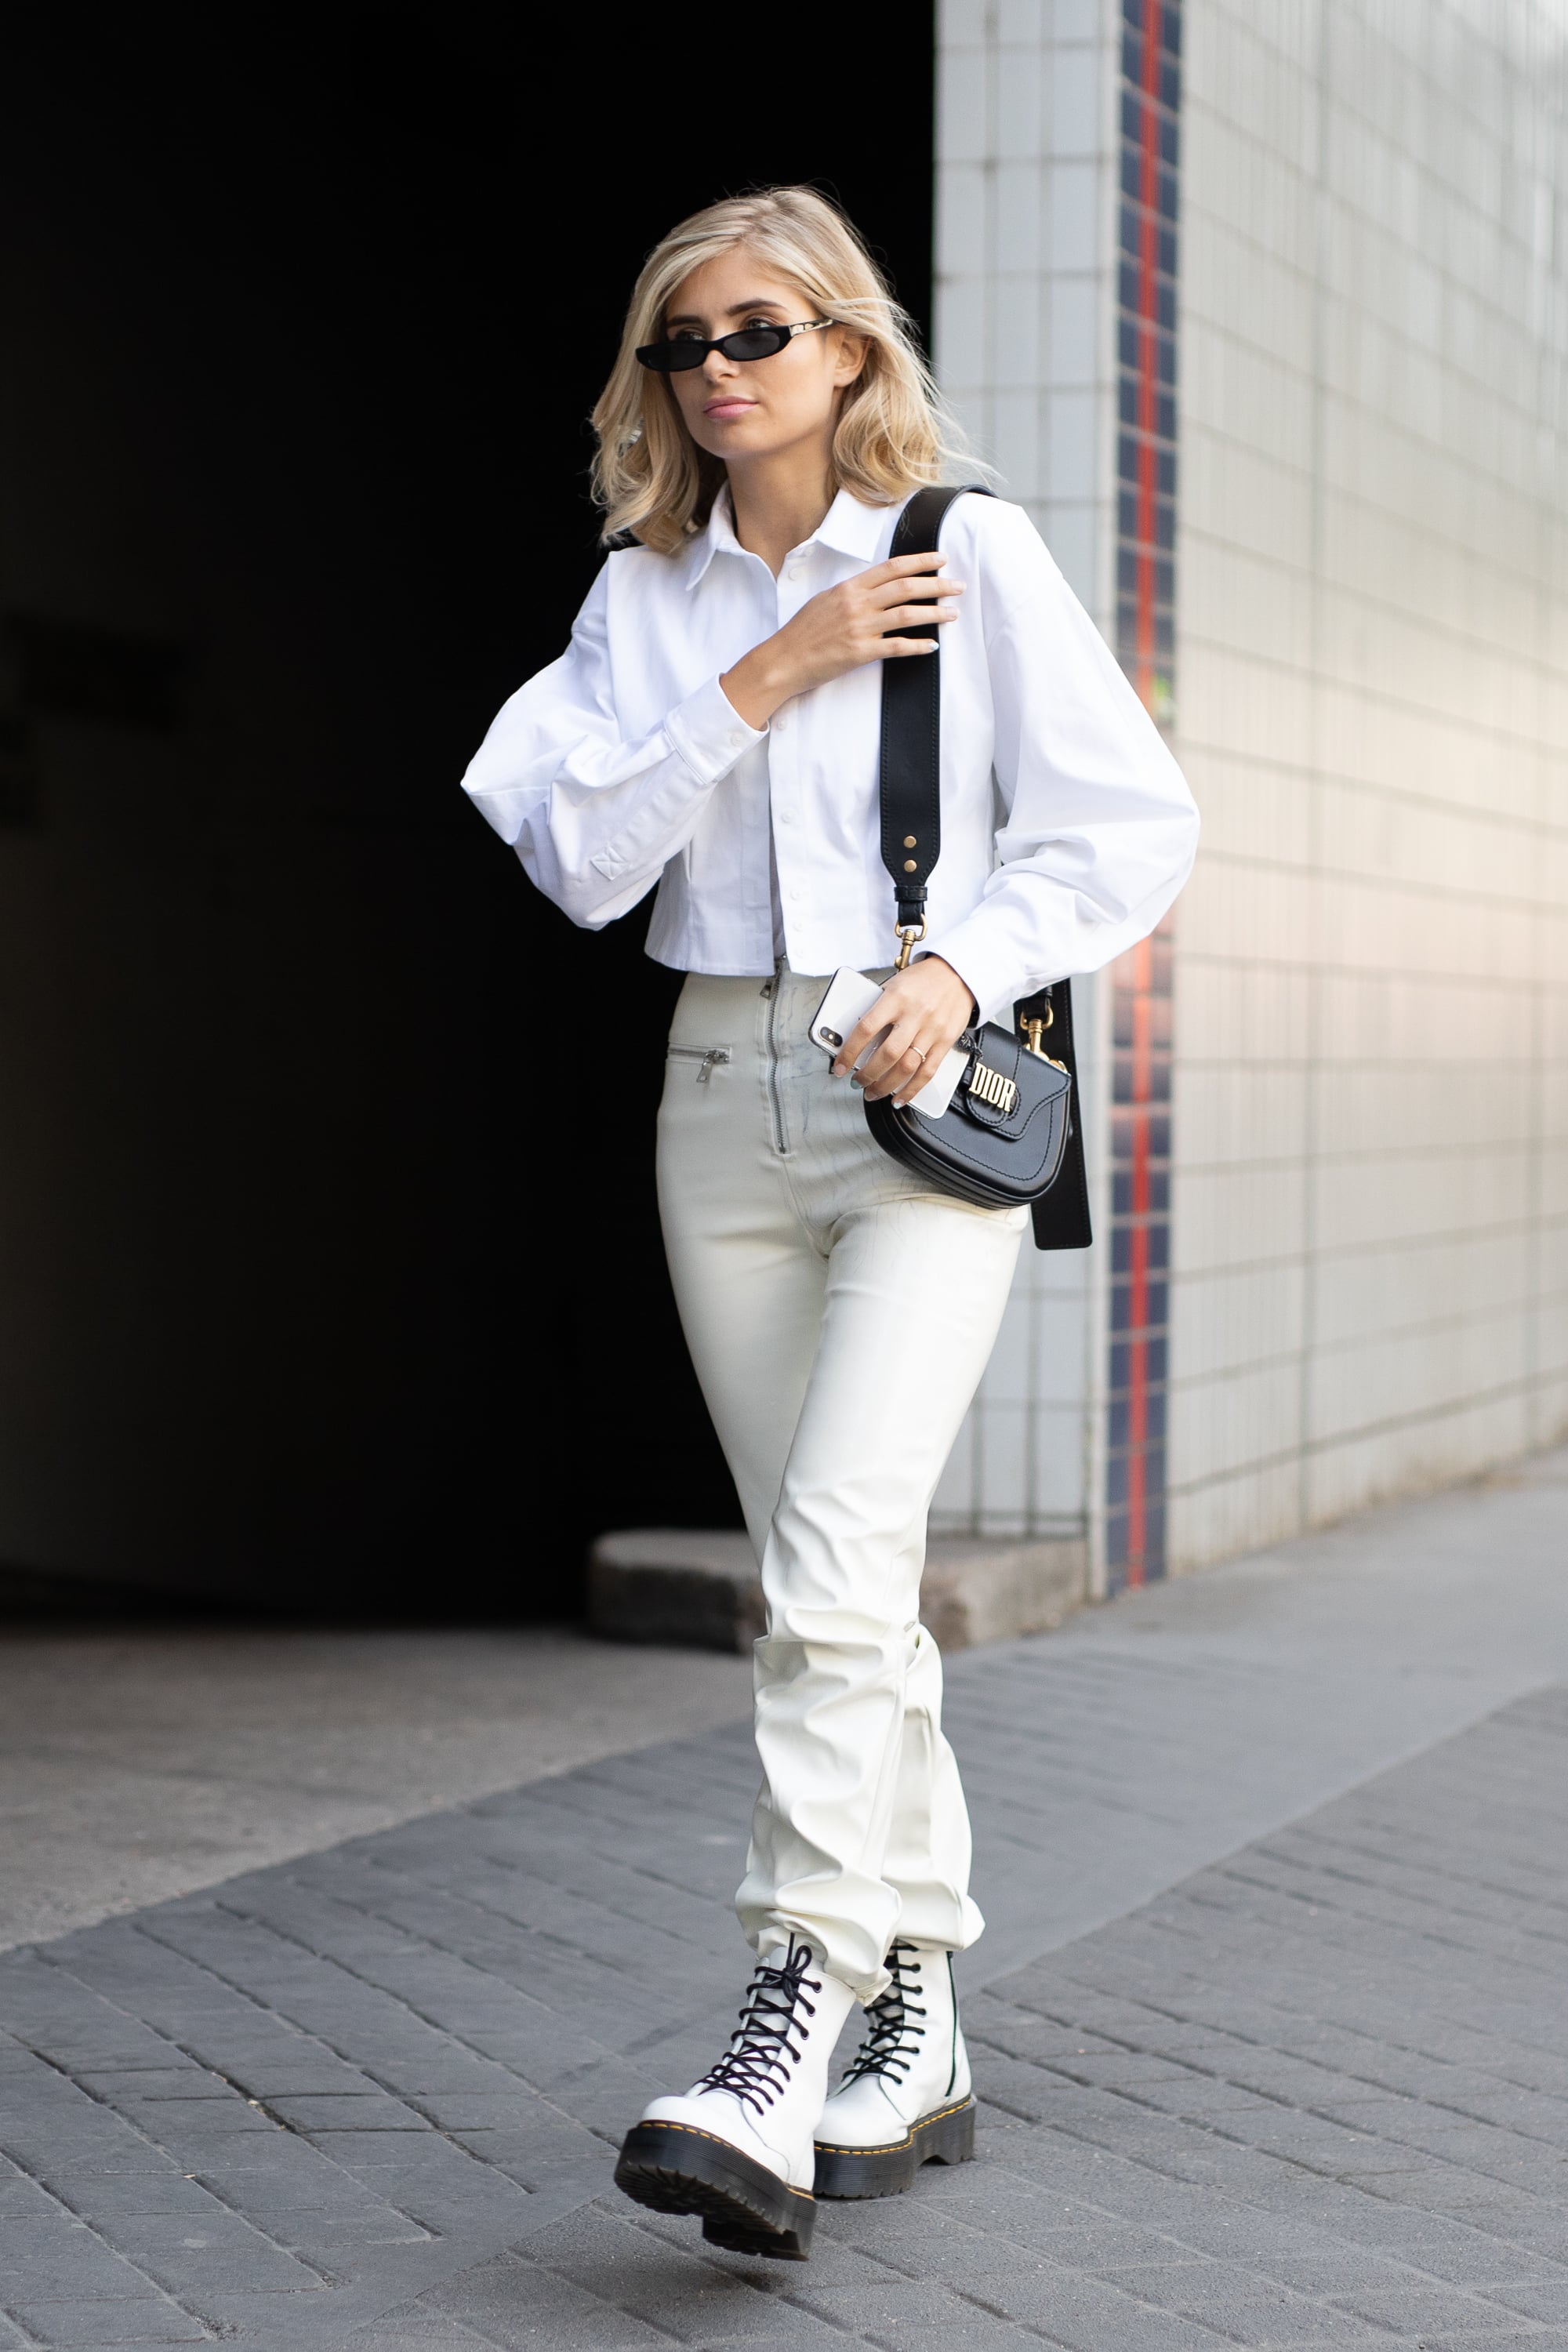 styling white doc martens